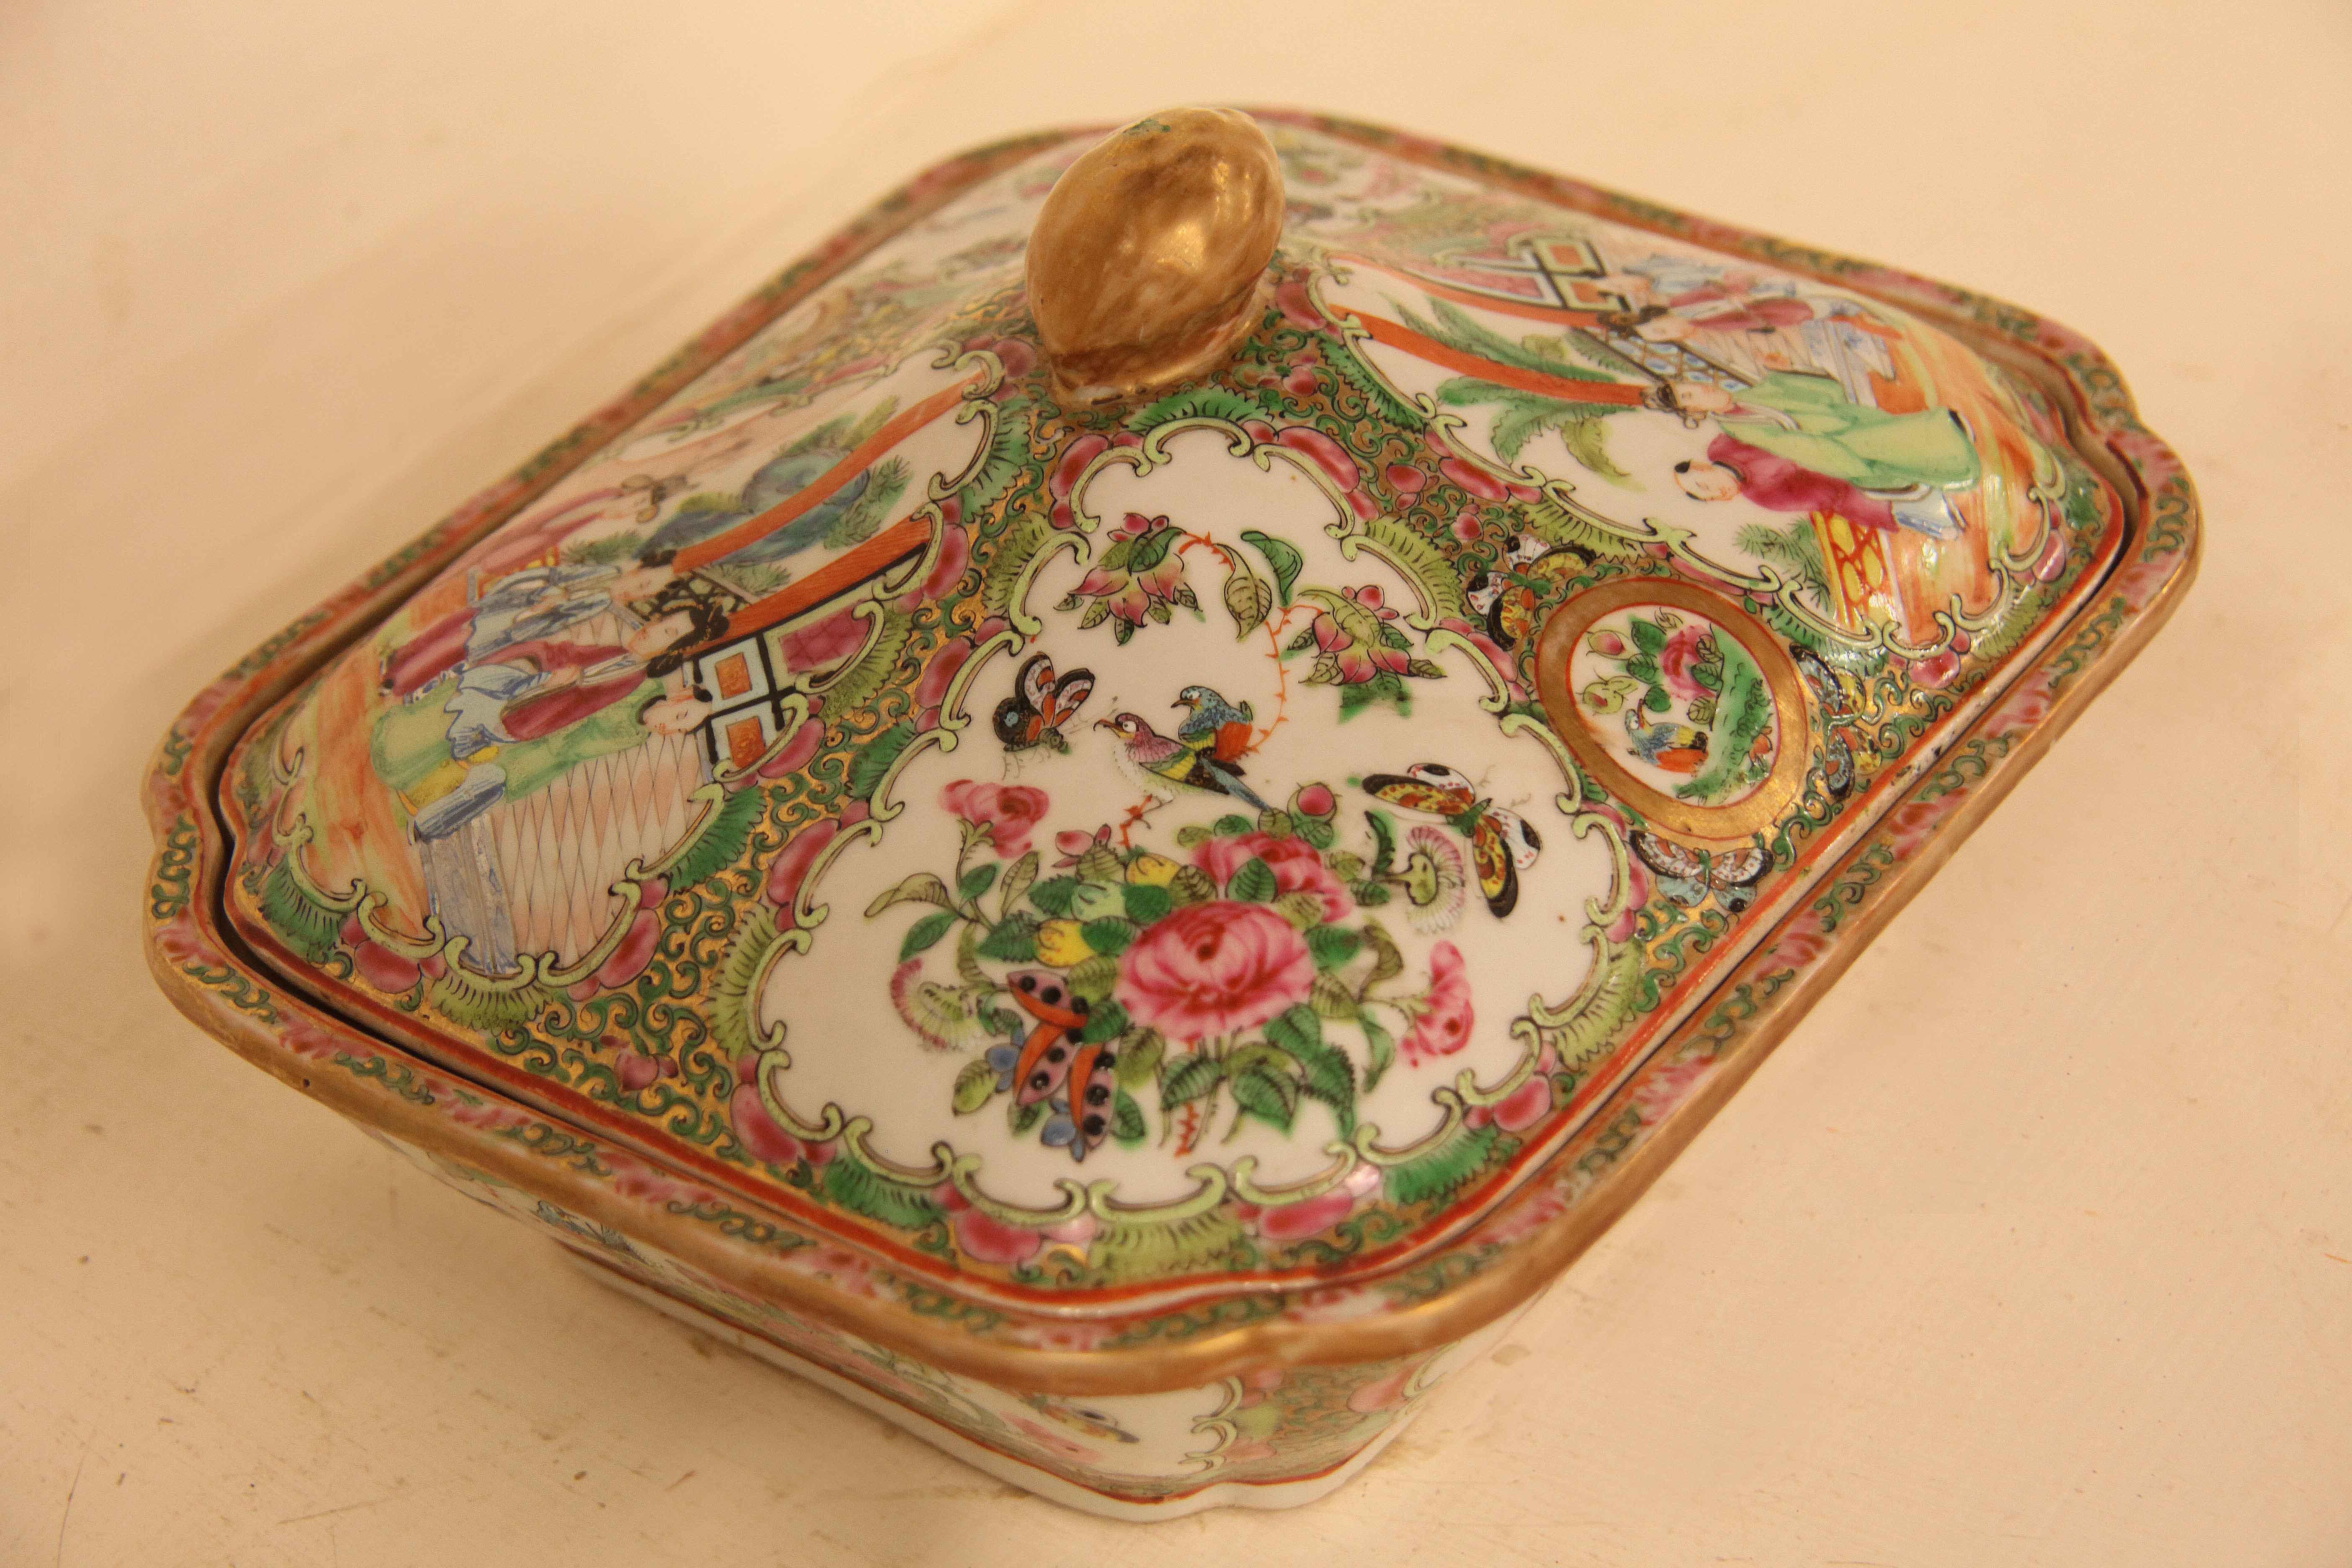 Chinese rose medallion tureen,  the lid and interior have scenes of women along with scenes of flowers, birds and butterflies ; central medallion in the interior with bird and flowers surrounded by butterflies. , exterior has similar scenes around